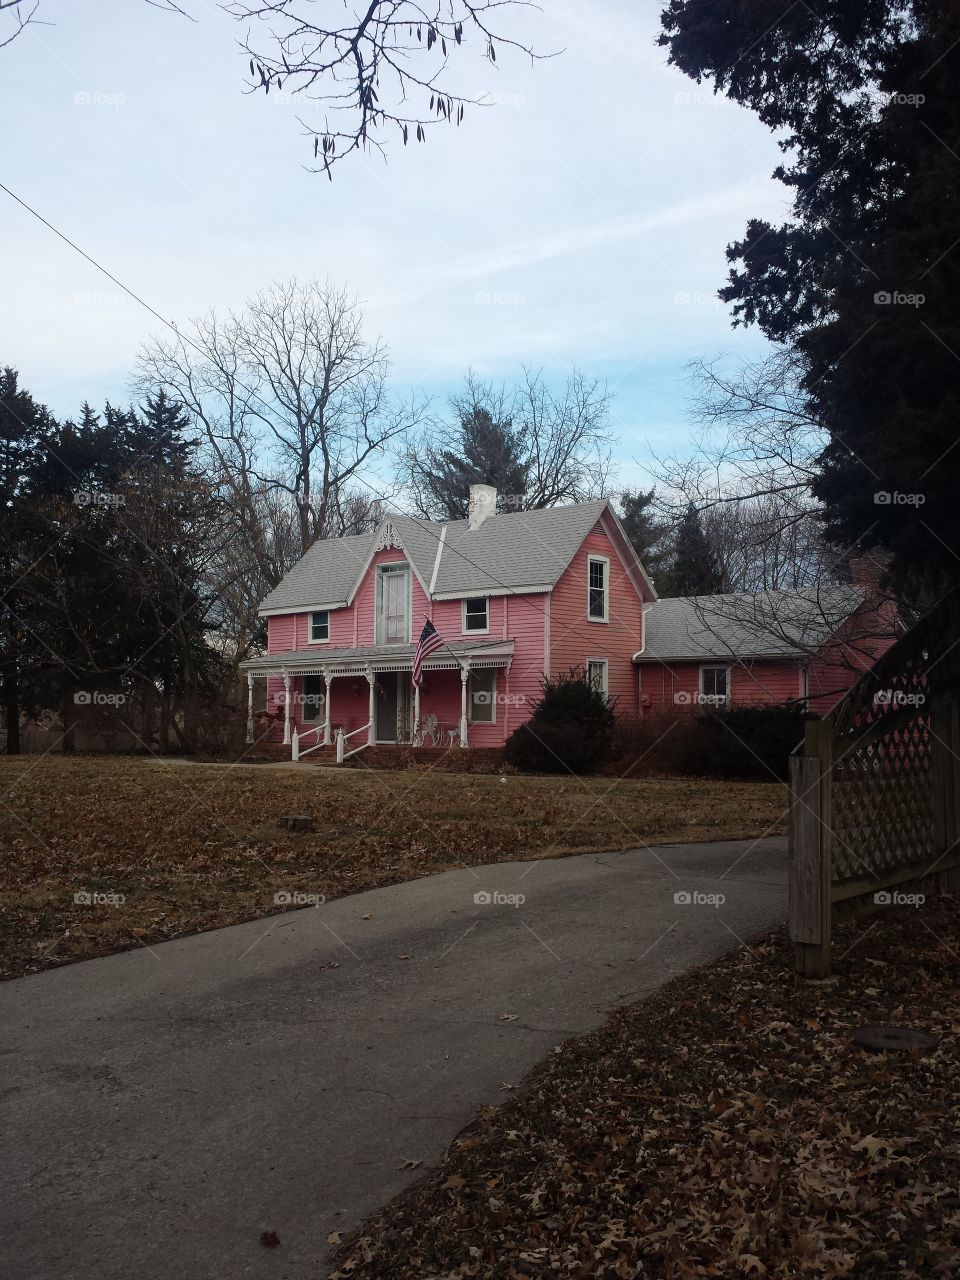 Pink Victorian House